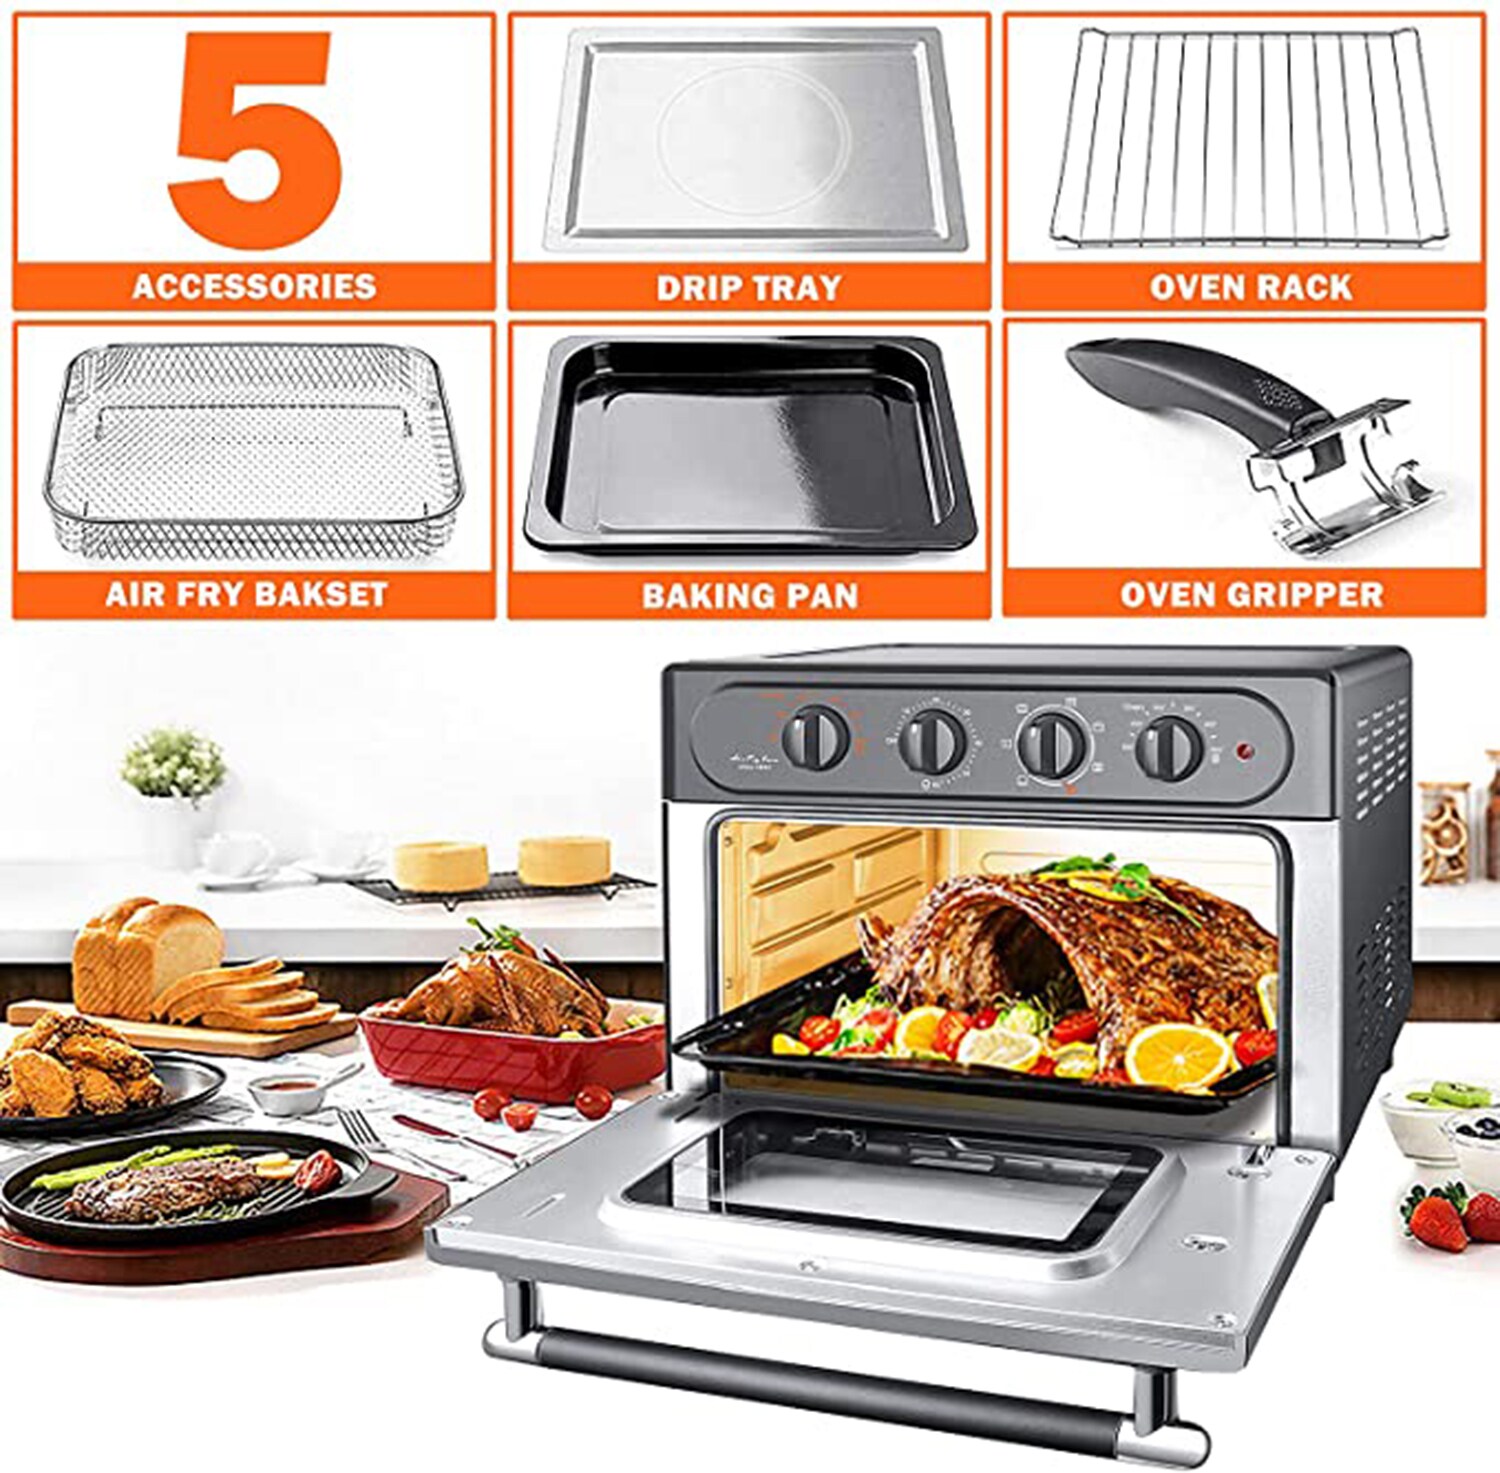 DASH Air Fry Multi Oven - 7 in 1 Convection Air Fry Oven with Non-stick Fry  Basket, Baking Pan & Rack, 23L, 1500-Watt - Stainless Steel